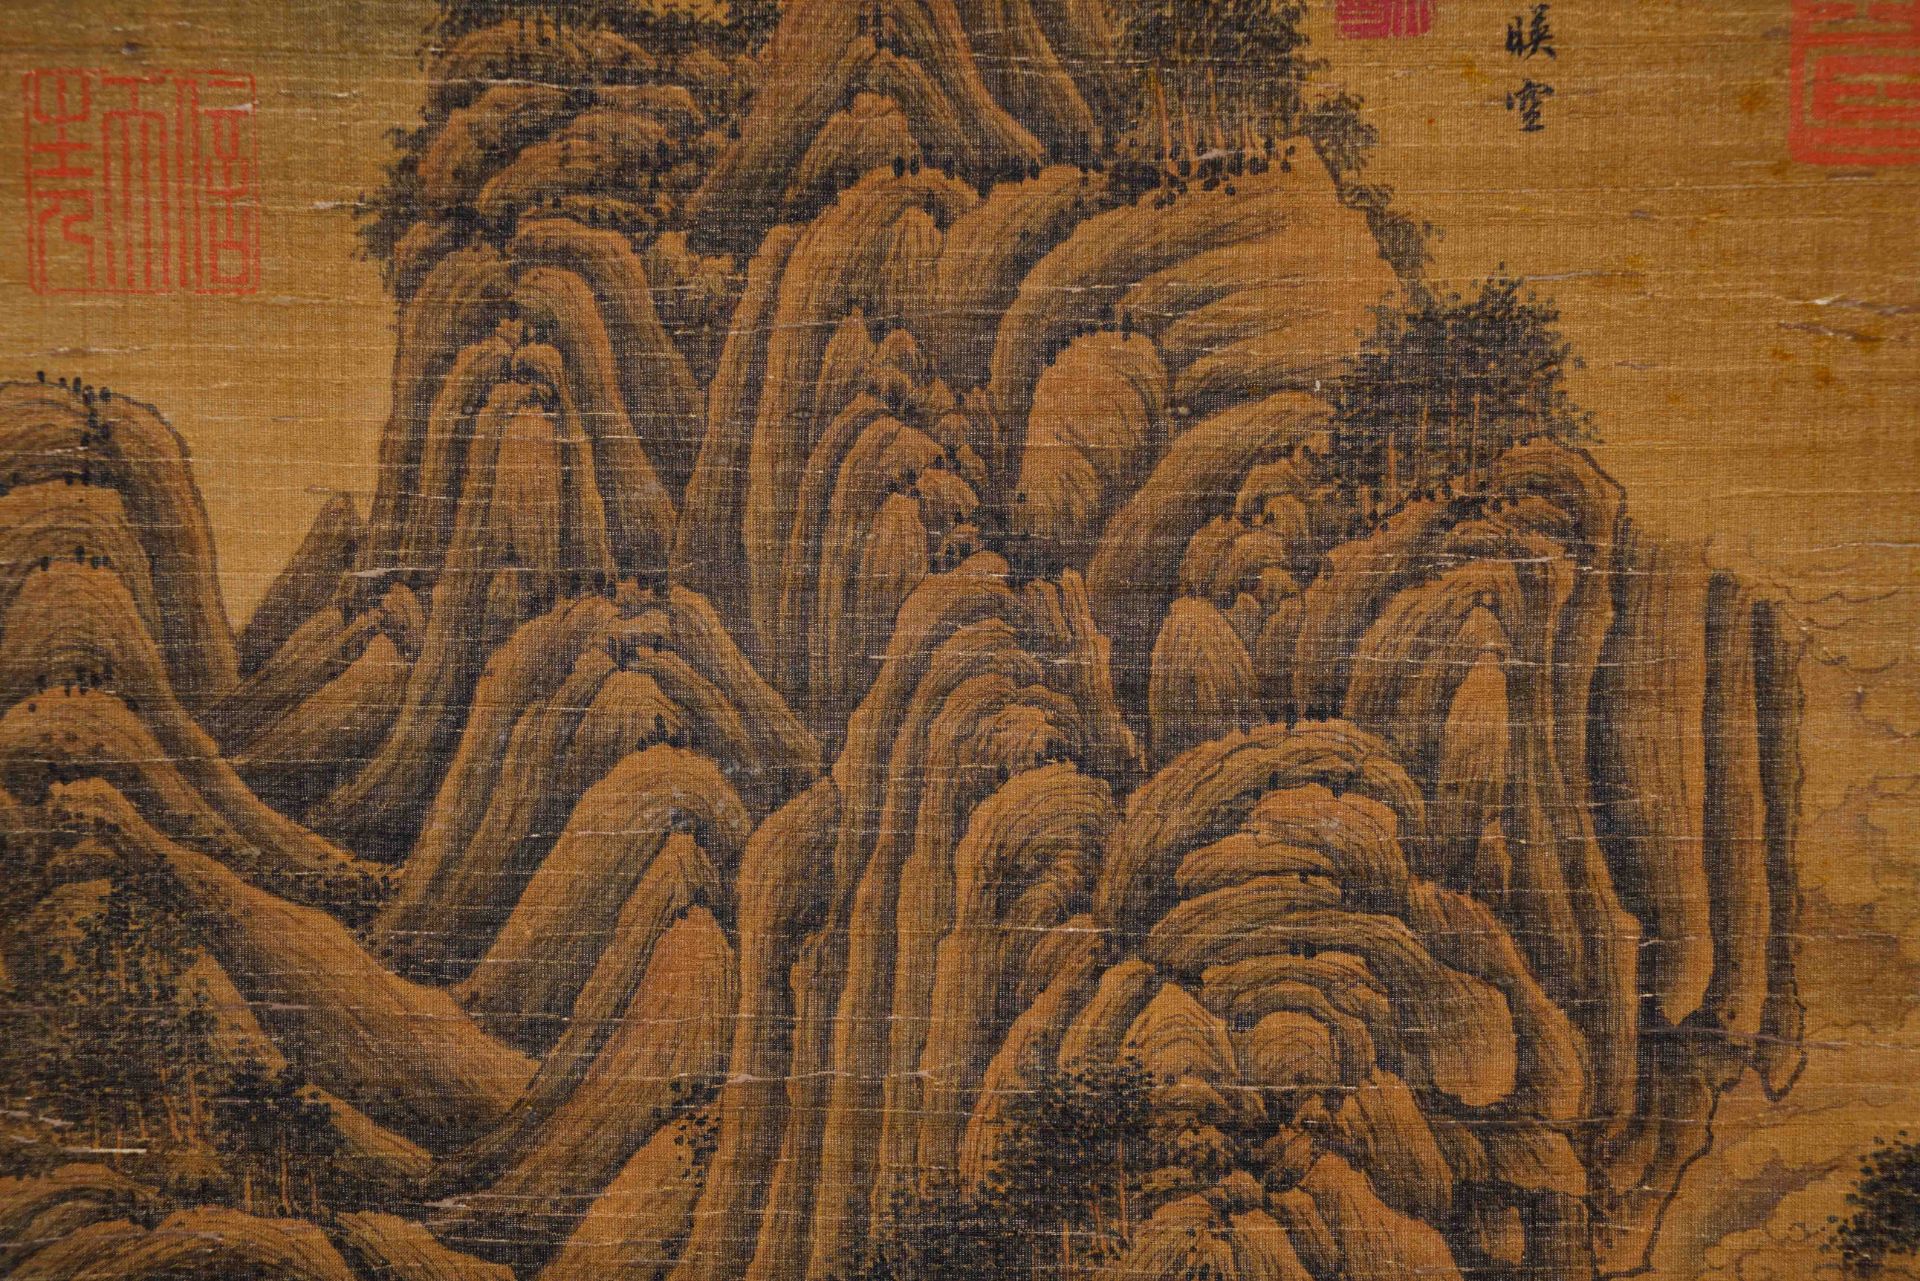 A Chinese Scroll Painting By Dong Yuan - Image 6 of 12